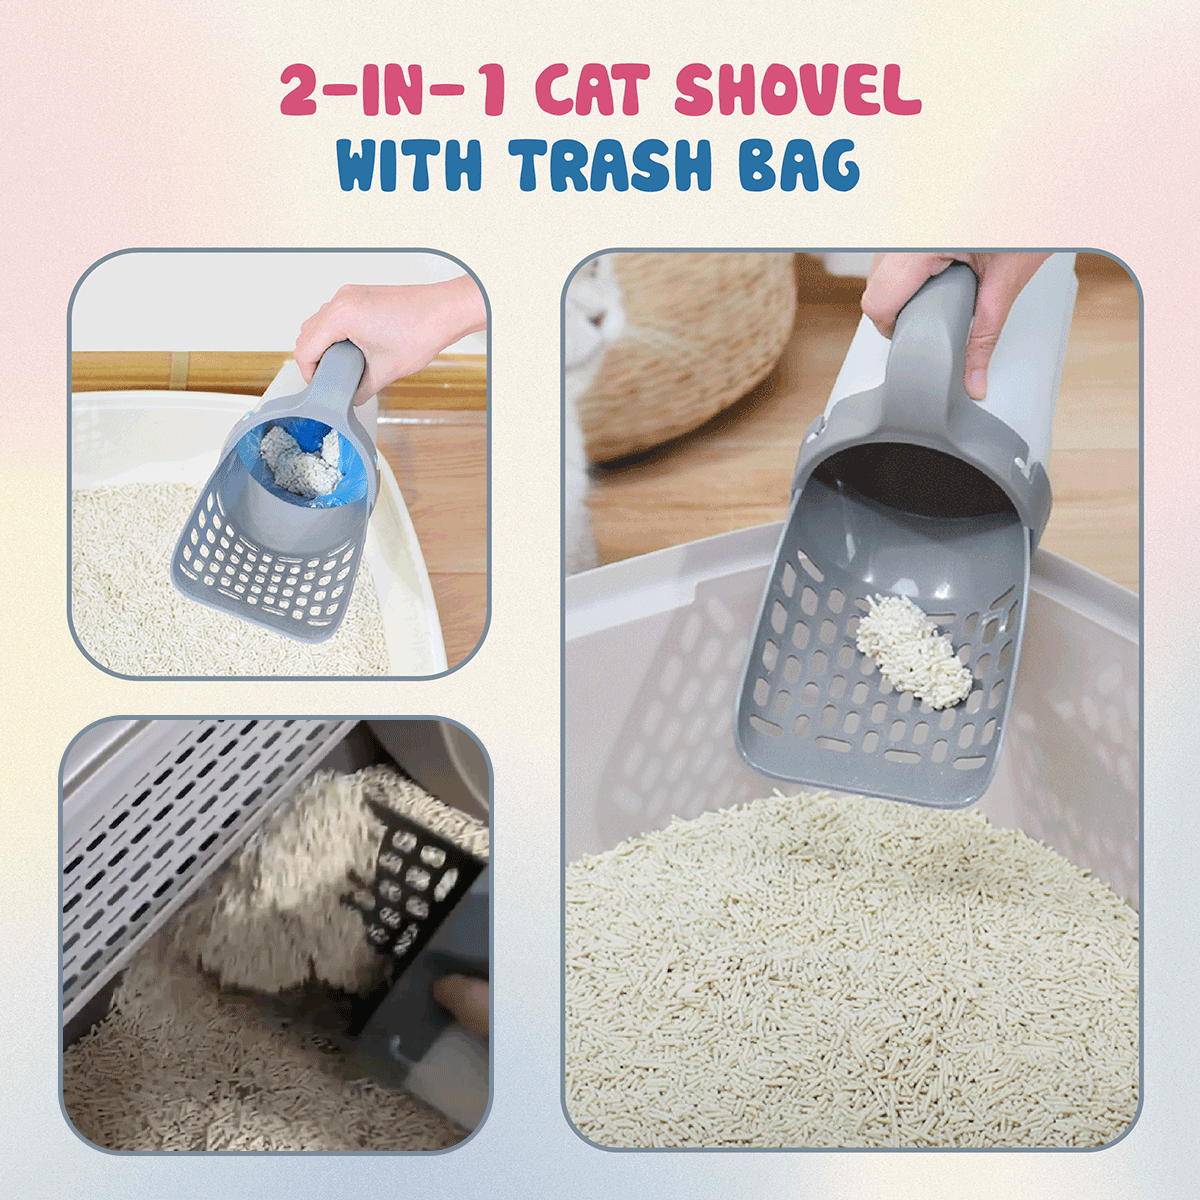 Scooper Self-cleaning Large Capacity Cat Shovel with Built-in Poop Bag -  gifts blast